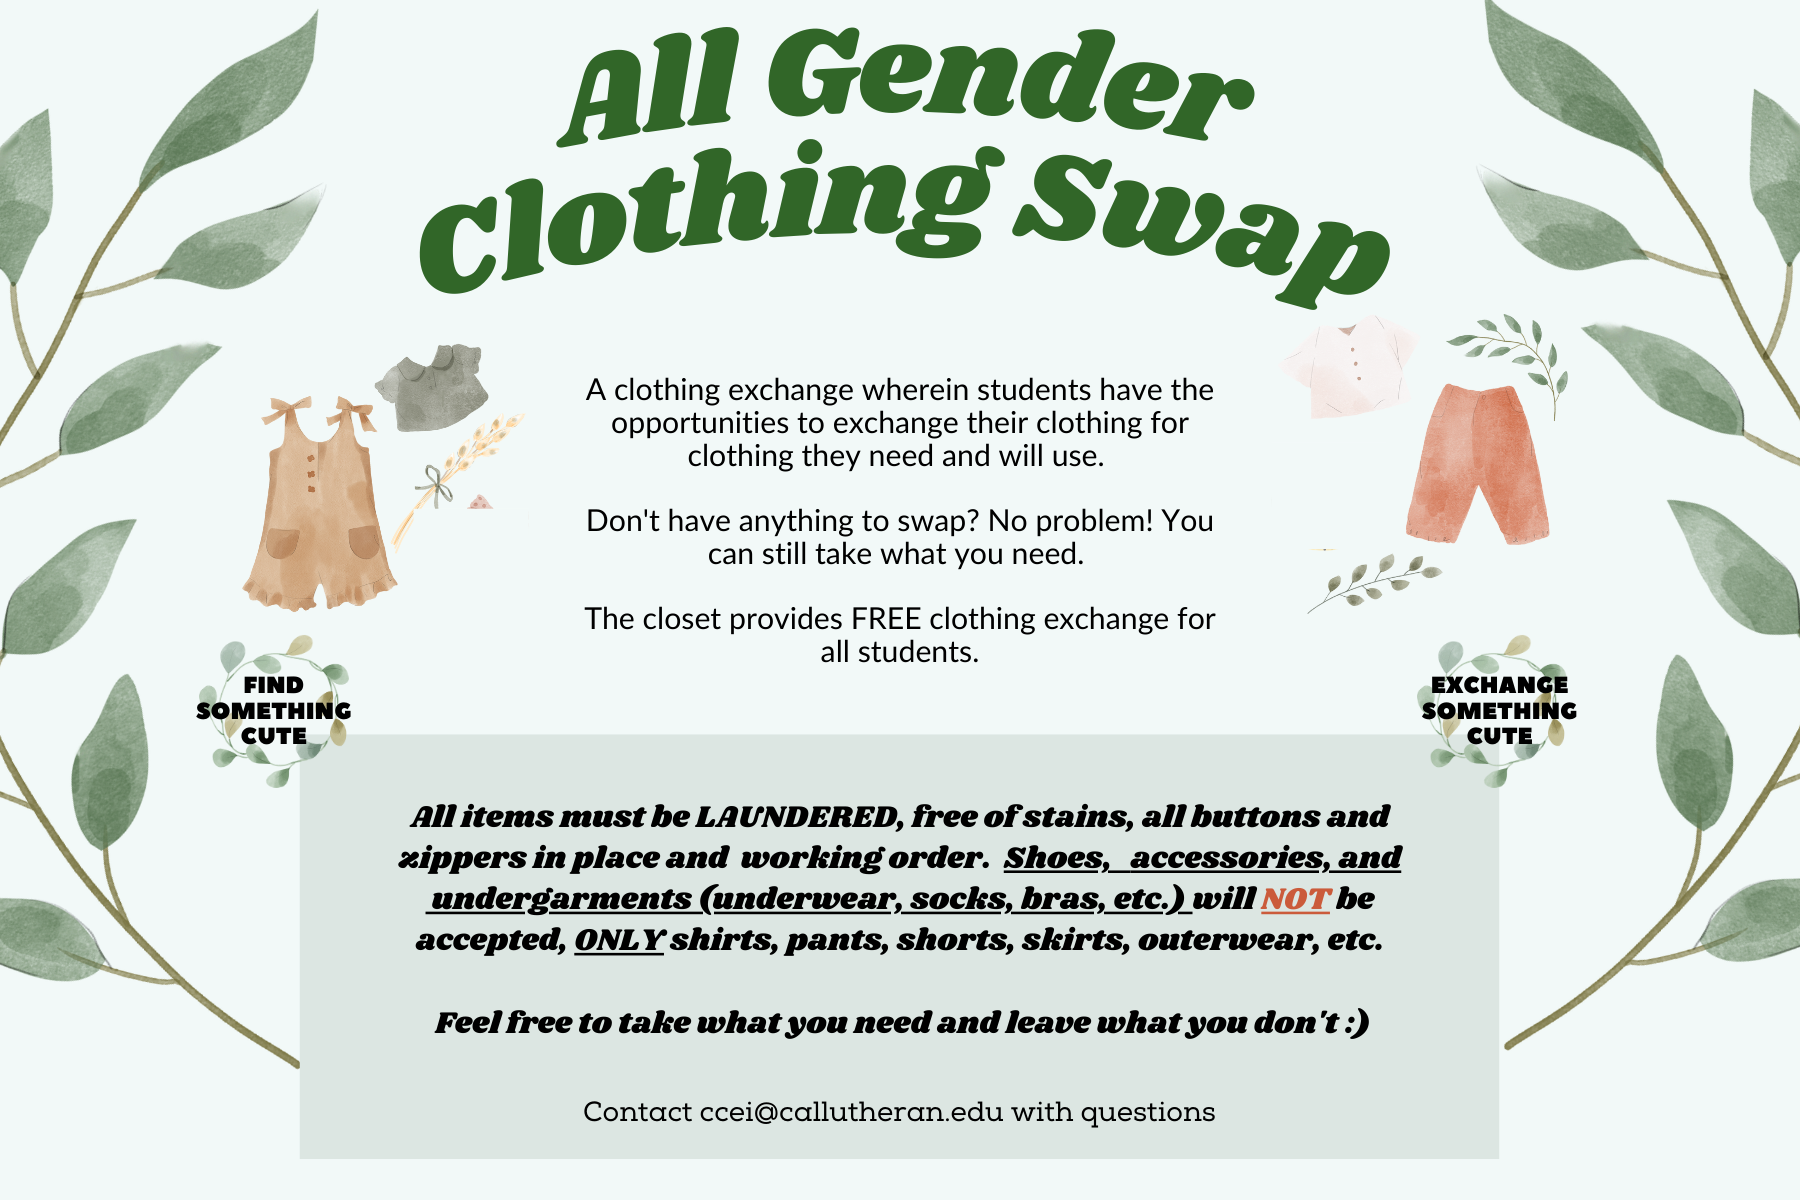 A clothing exchange wherein students have the opportunities to exchange their clothing for clothing they need and will use.   Don't have anything to swap? No problem! You can still take what you need.   The closet provides FREE clothing exchange for all students.